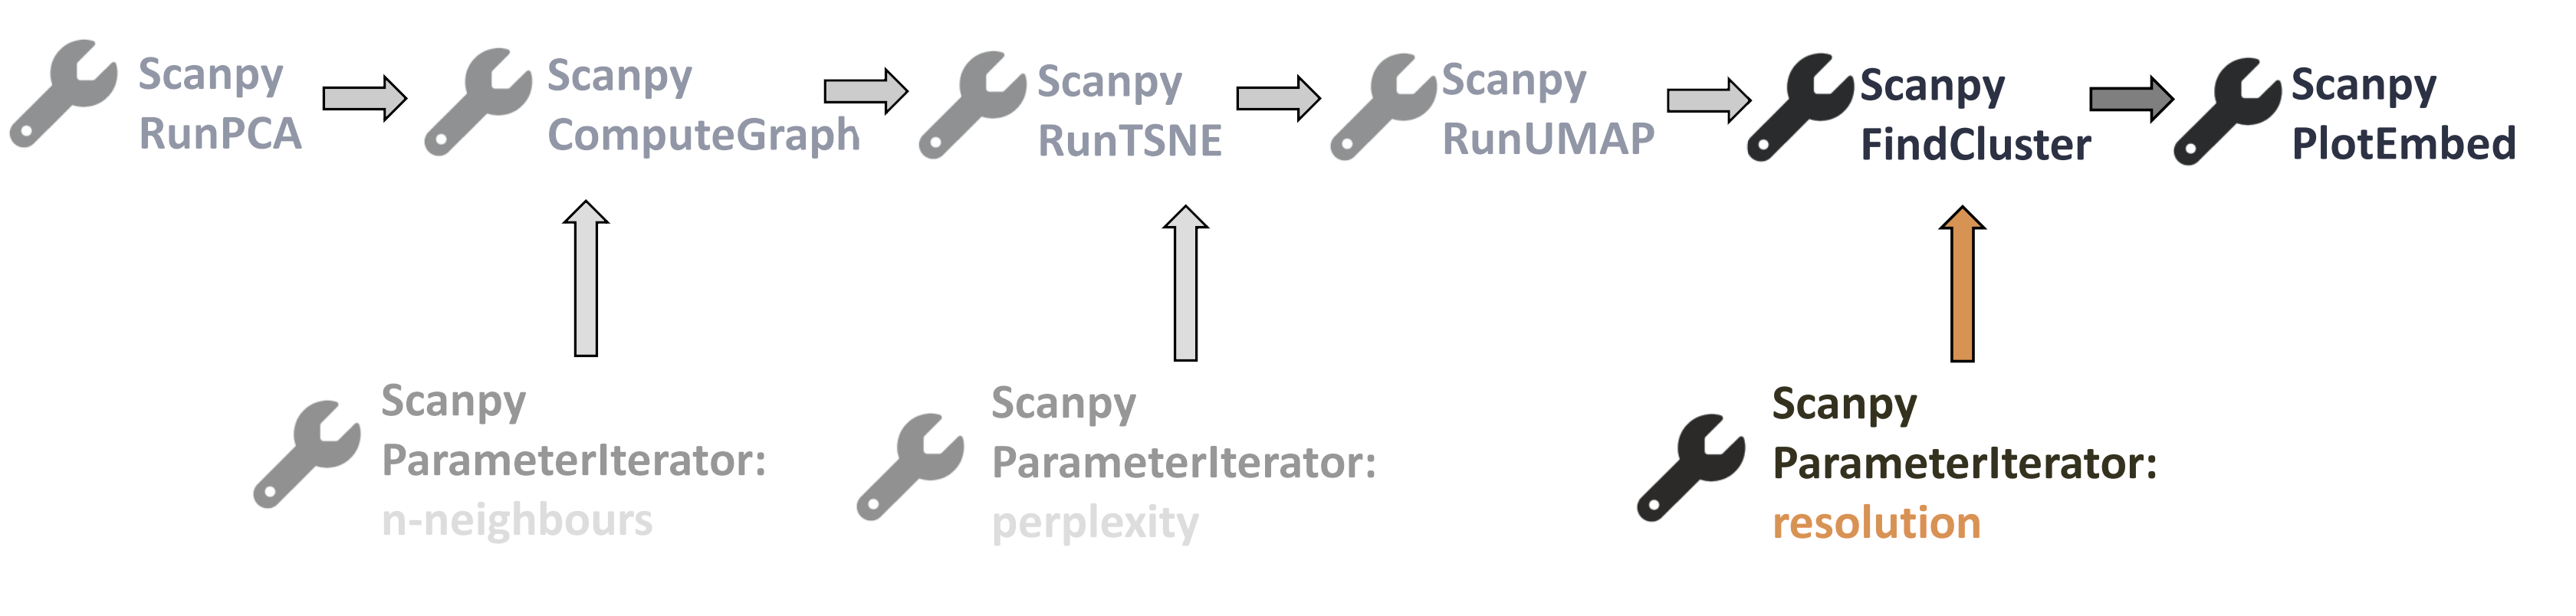 Image showing the step we are at: we have chosen values for Scanpy ComputeGraph and Scanpy RunTSNE, then proceeded to Scanpy RunUMAP to get to Scanpy FindCluster.